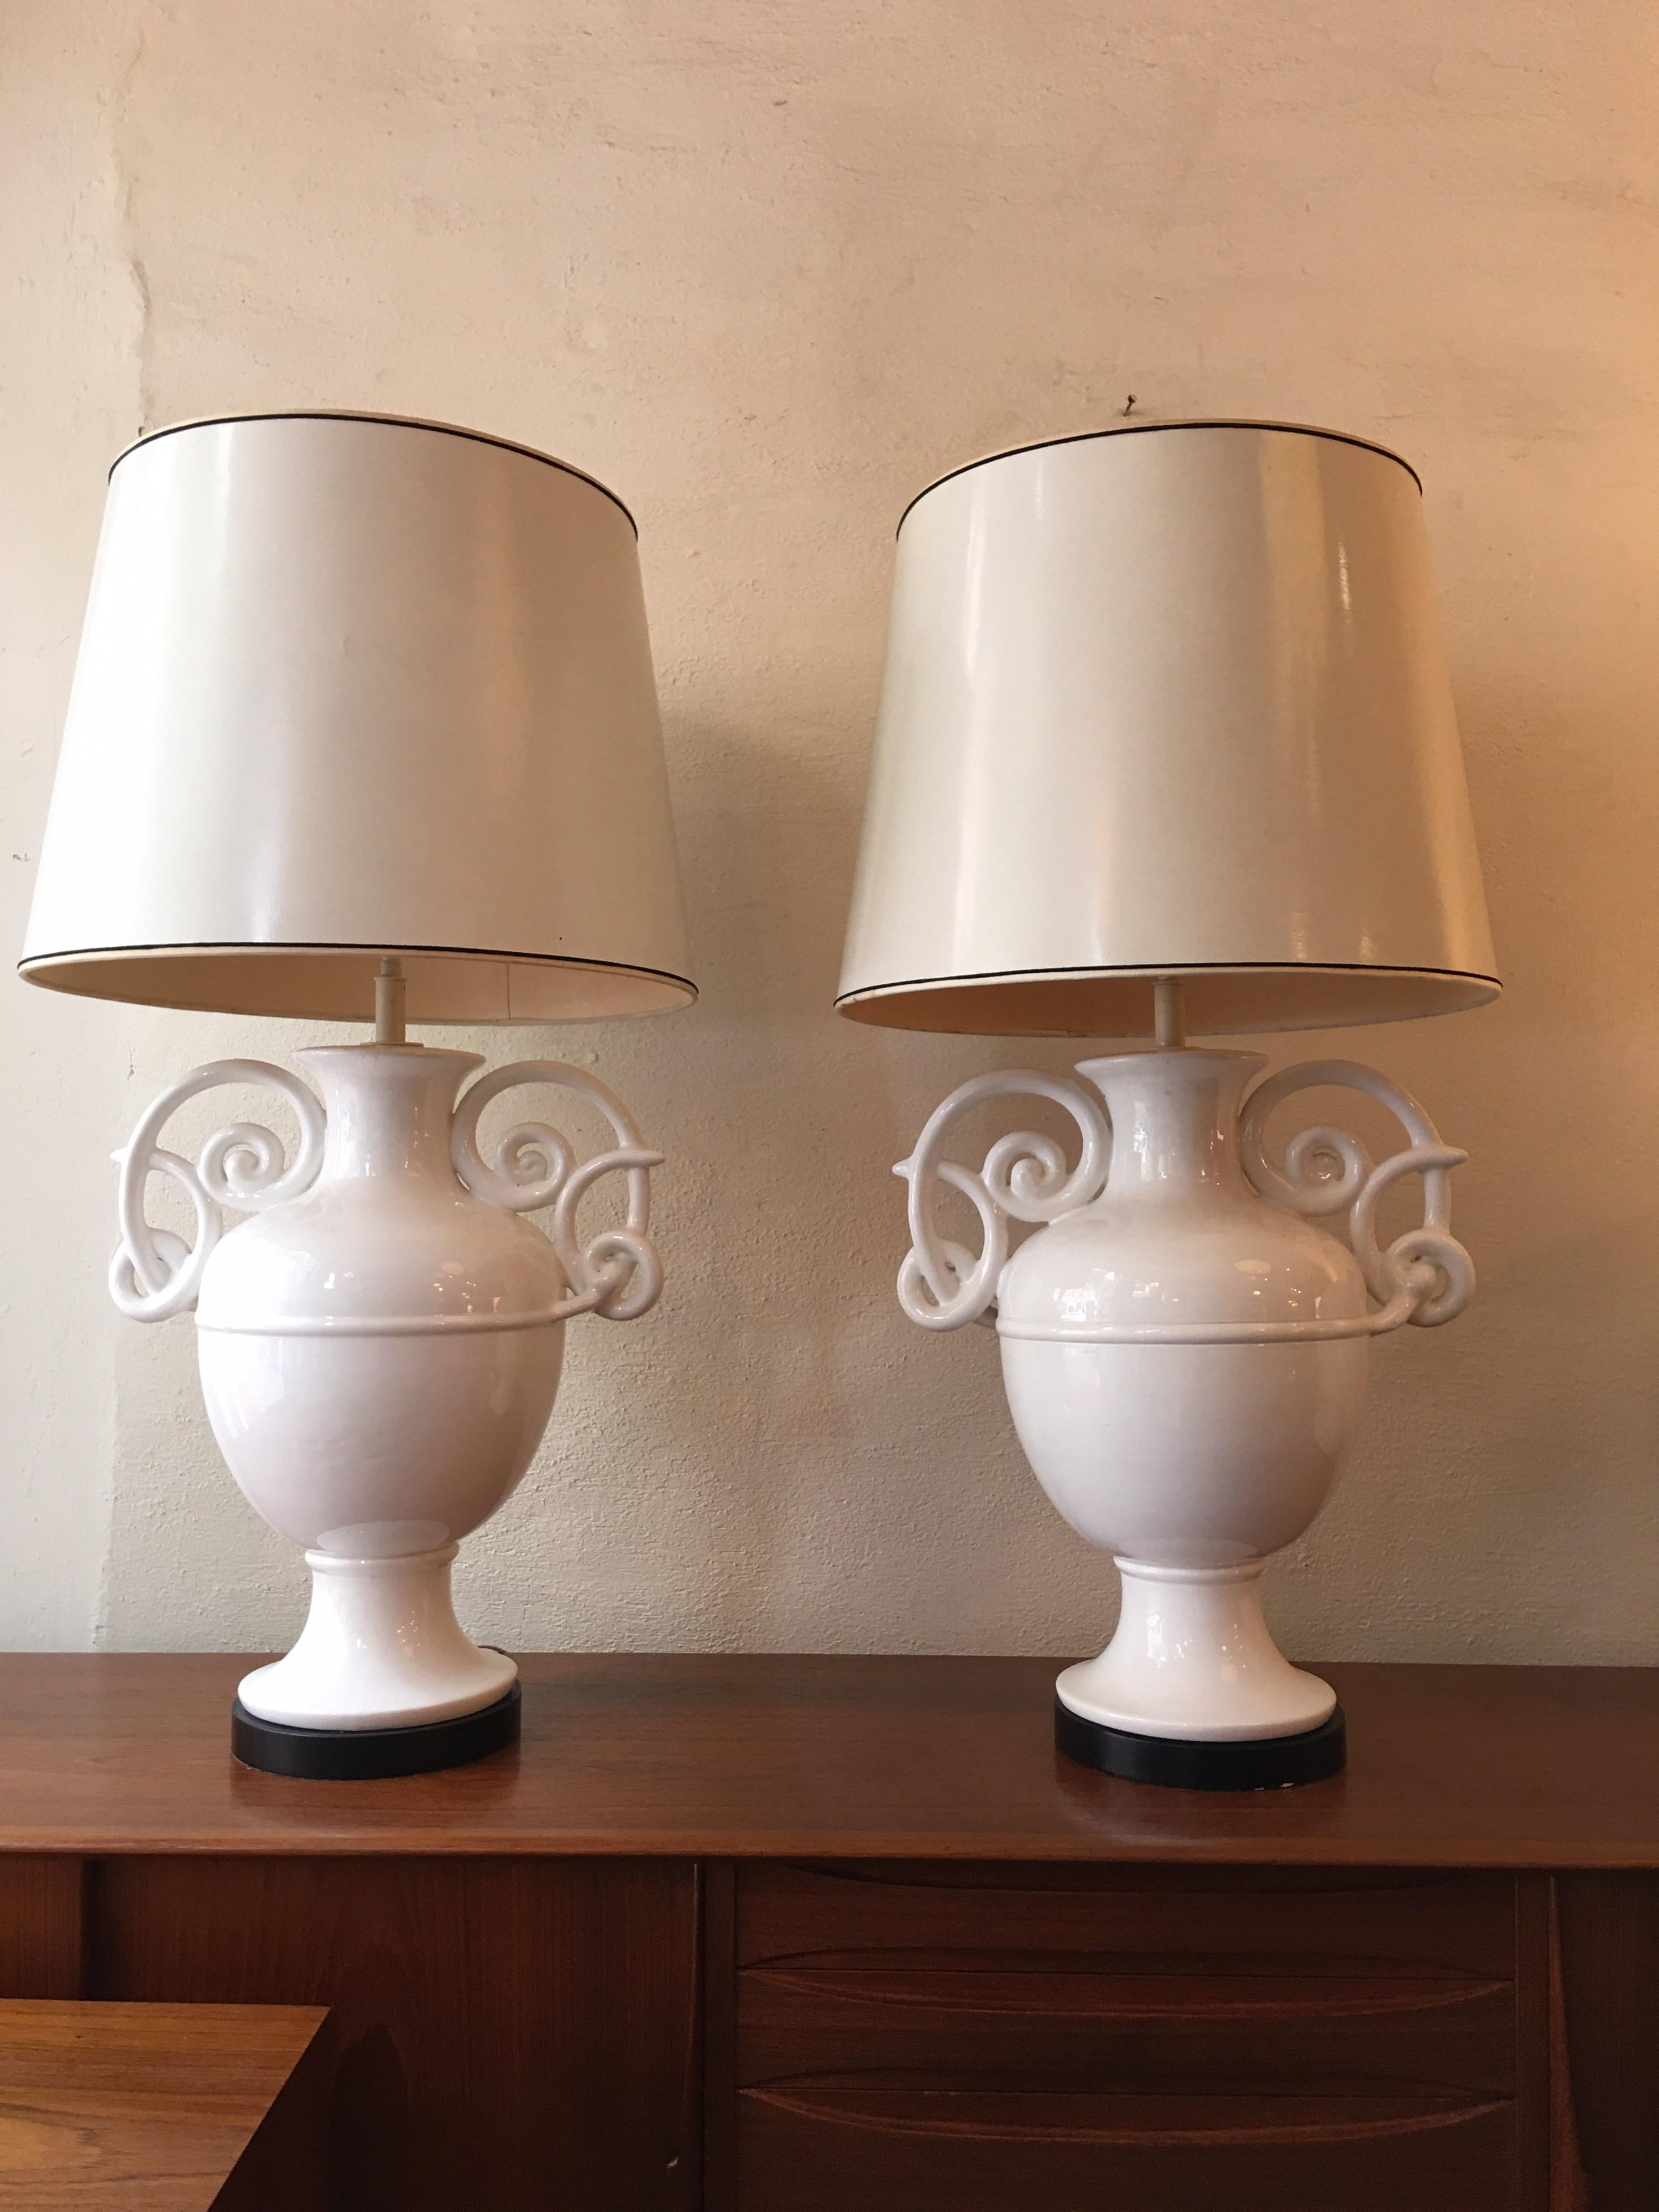 Hollywood Regency Monumental Ceramic Italian Urn Lamps with Curly Handles/  Style of Giacometti